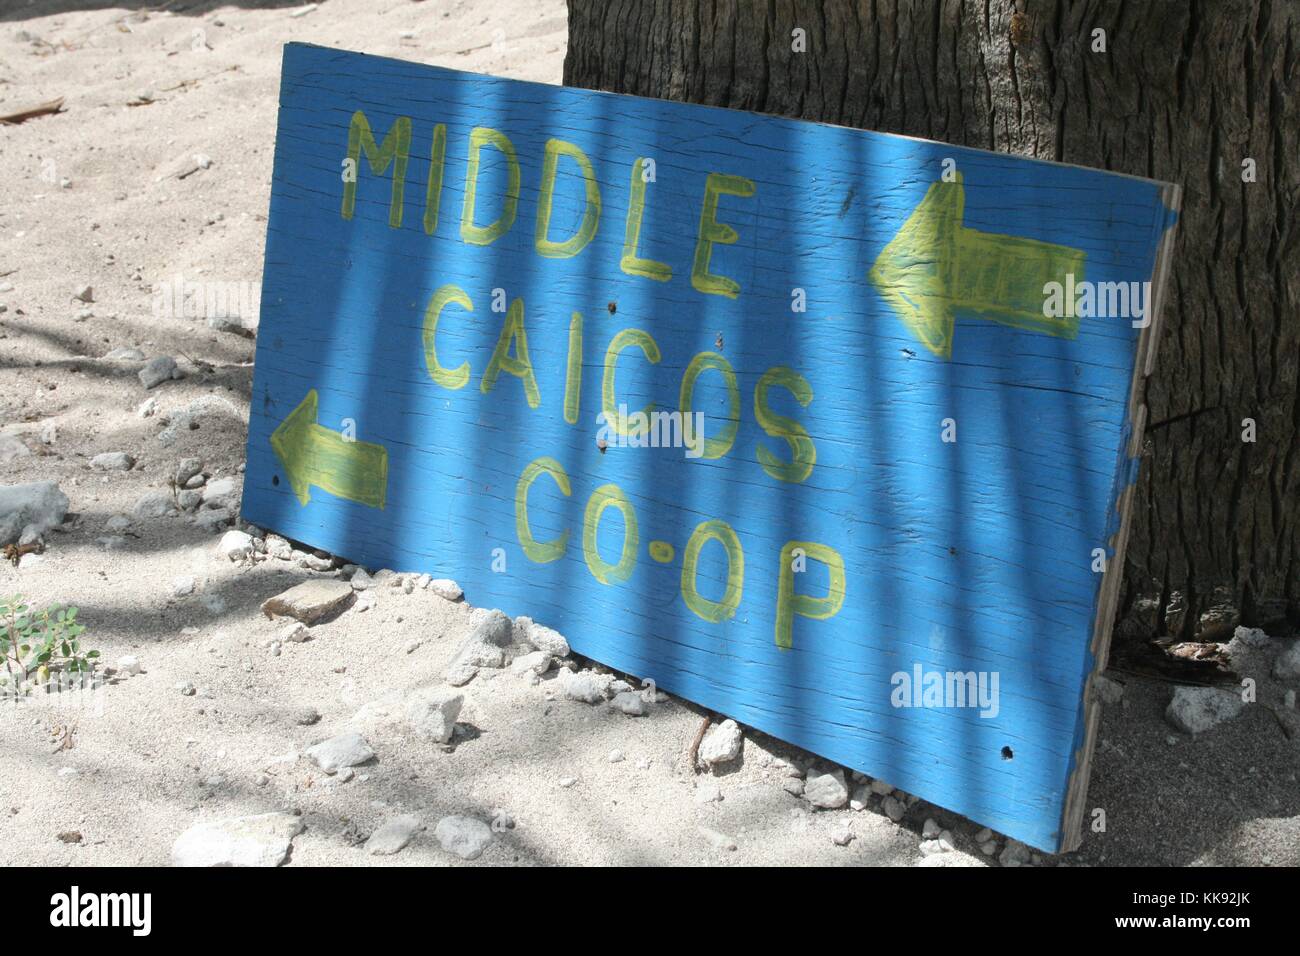 A photograph of a painted wooden sign that reads 'Middle Caicos Co-Op', the blue sign also has arrows that point in the direction of the business, it rests against a tree in the sand, the store represents local artists that produce souvenirs for tourists, Turks and Caicos Islands, 2013. Stock Photo